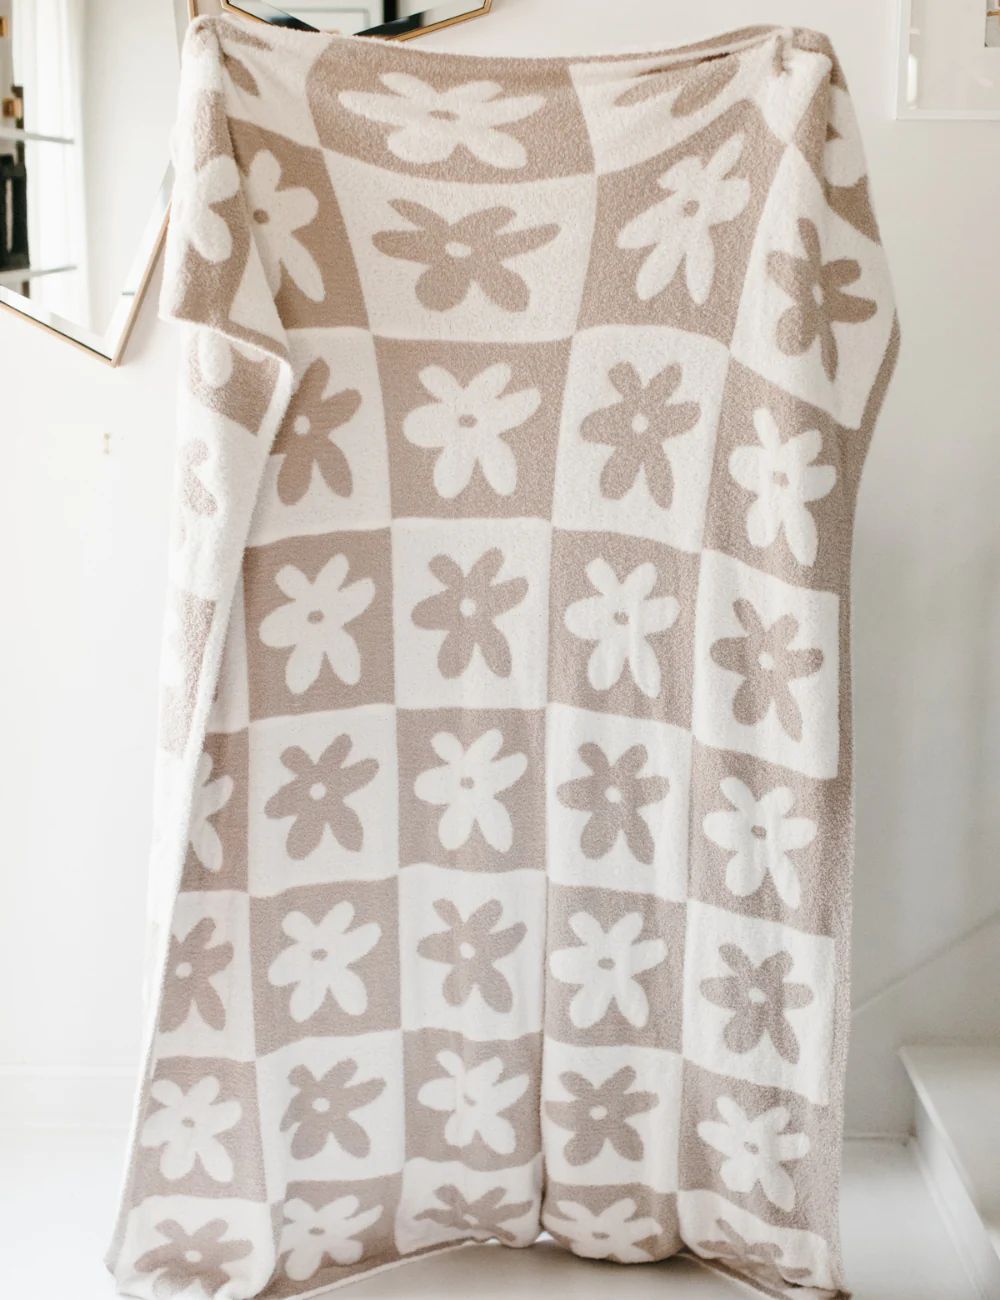 TSC x Tia Booth: Mod Daisy Buttery Blanket | The Styled Collection